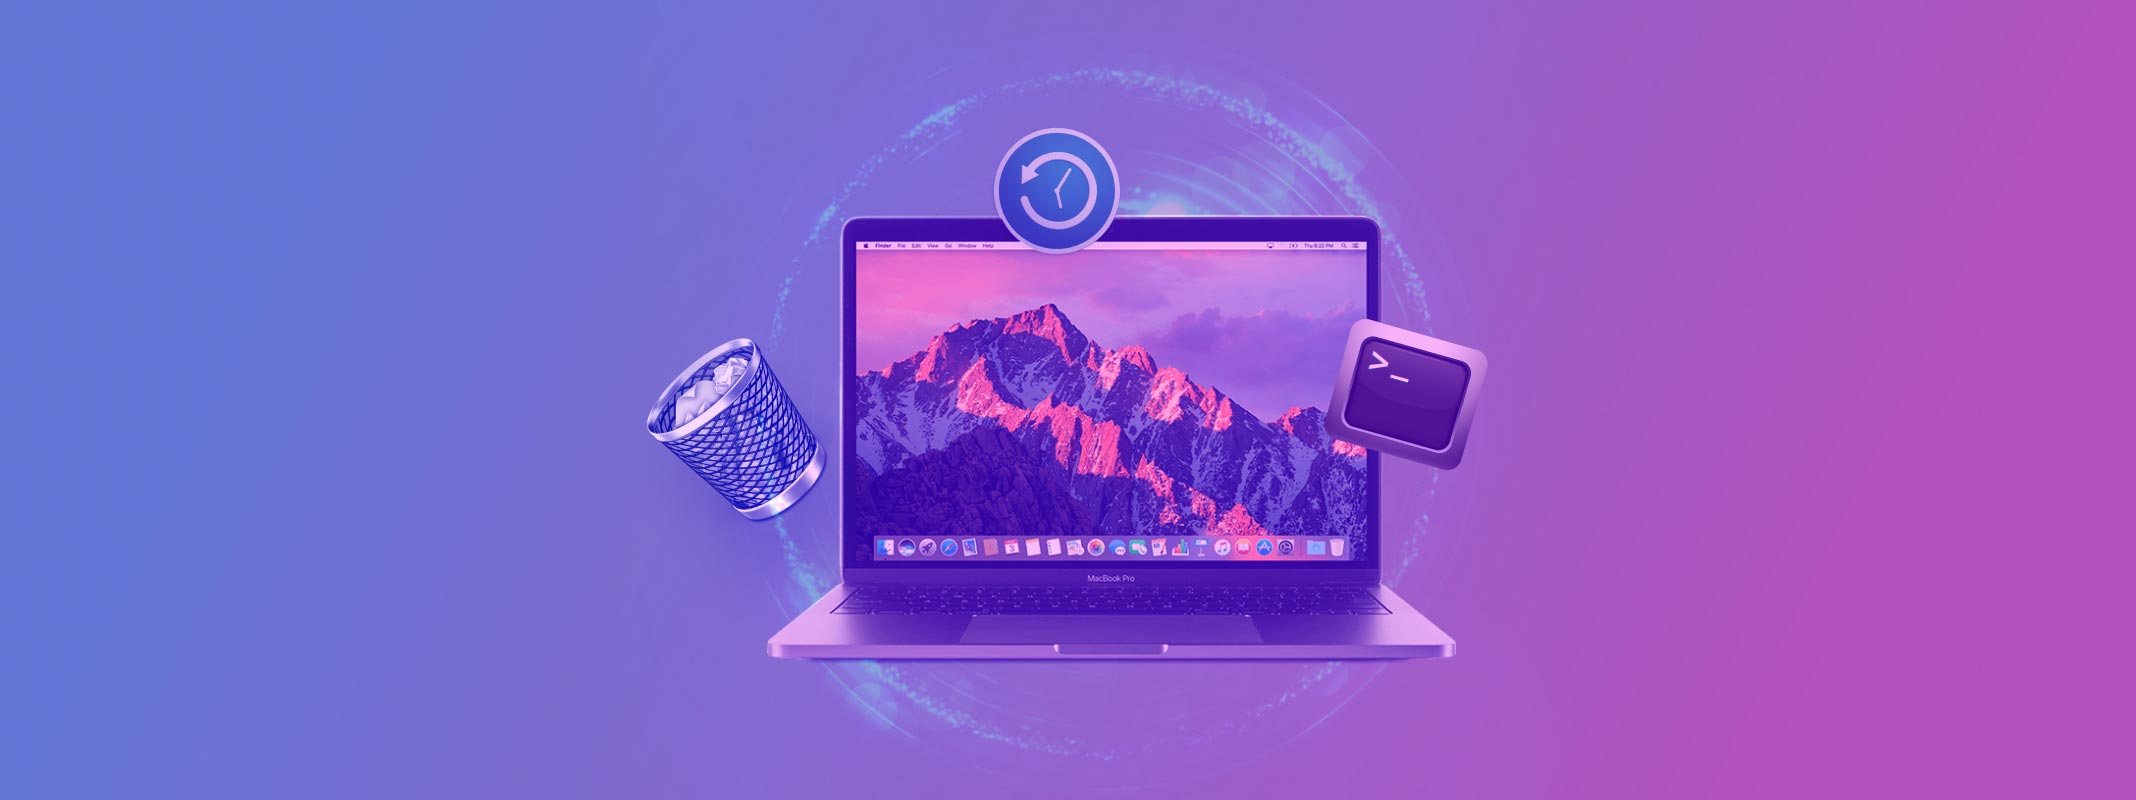 find deleted files mac using blacklight